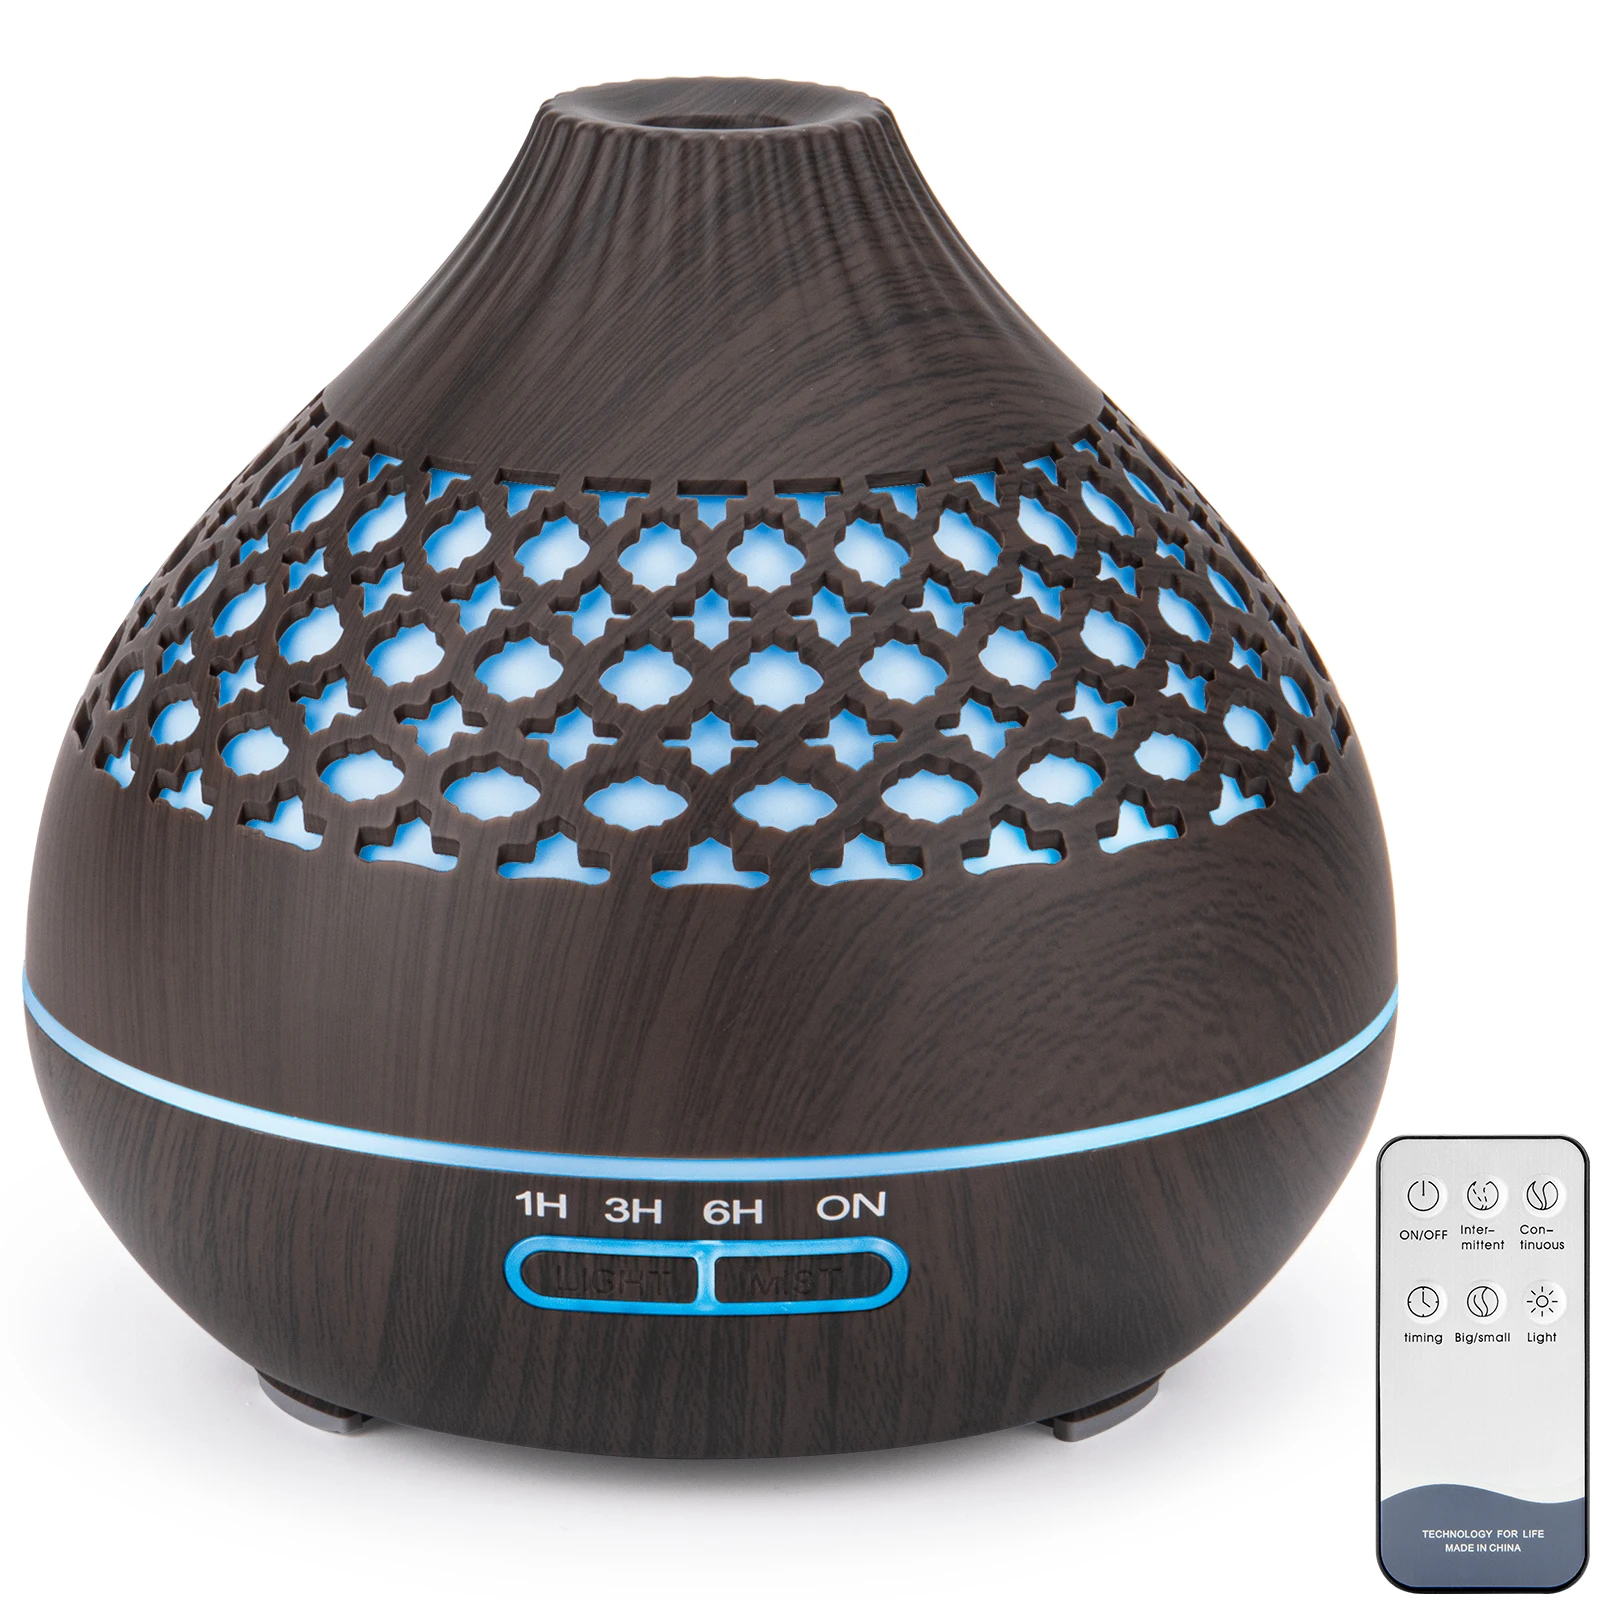 Carved Wood Grain Aroma Diffuser 400ml Dark Brown，Ultrasonic Air Humidification Of Office Aromatic Oil Diffuser，With Night Light